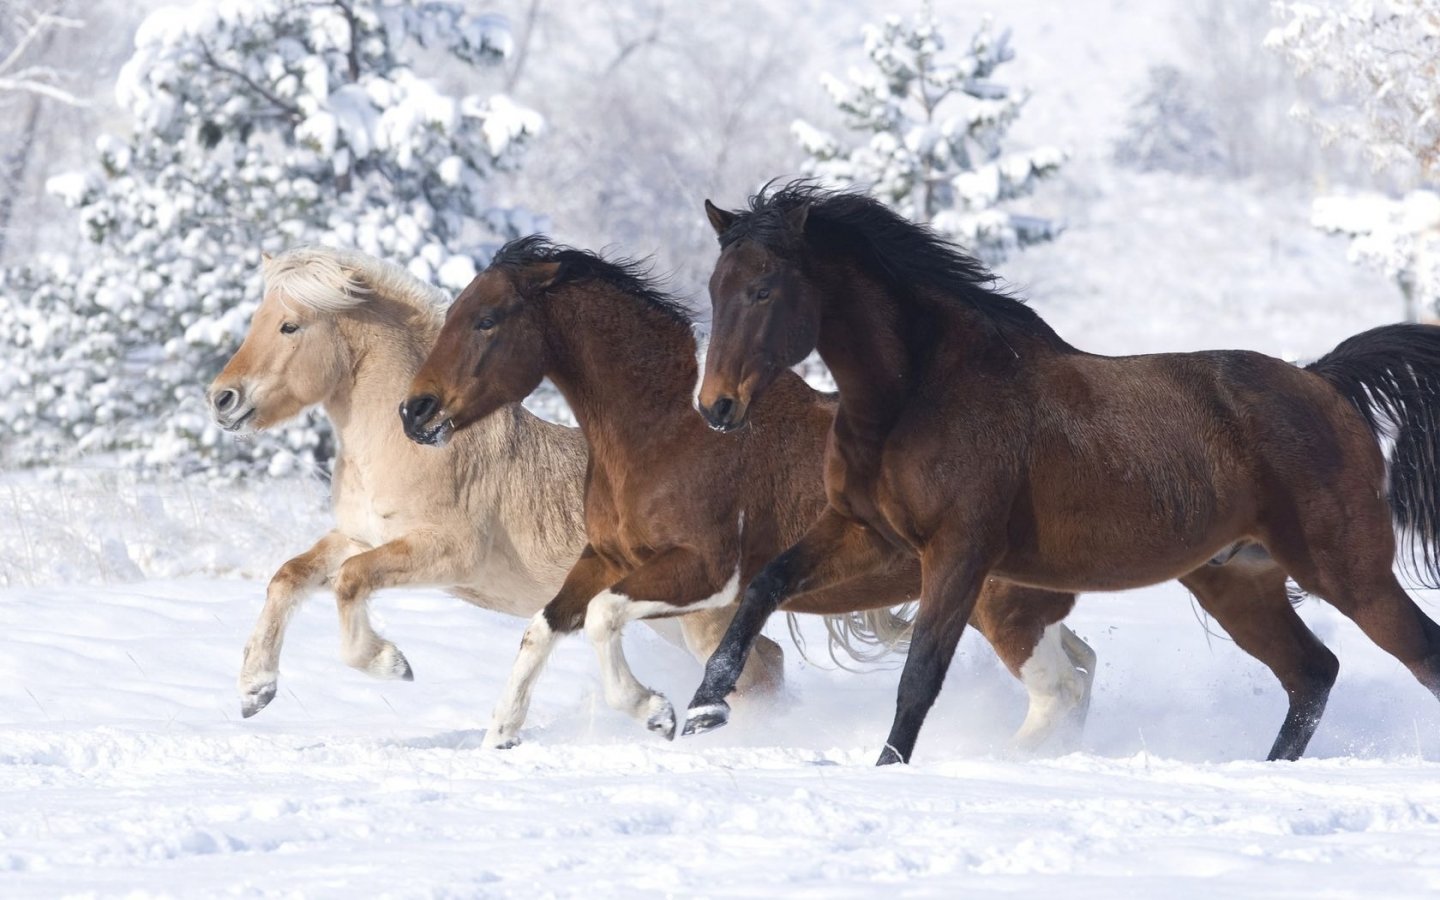 Wallpaper Of Horses Which Is Under The Horse